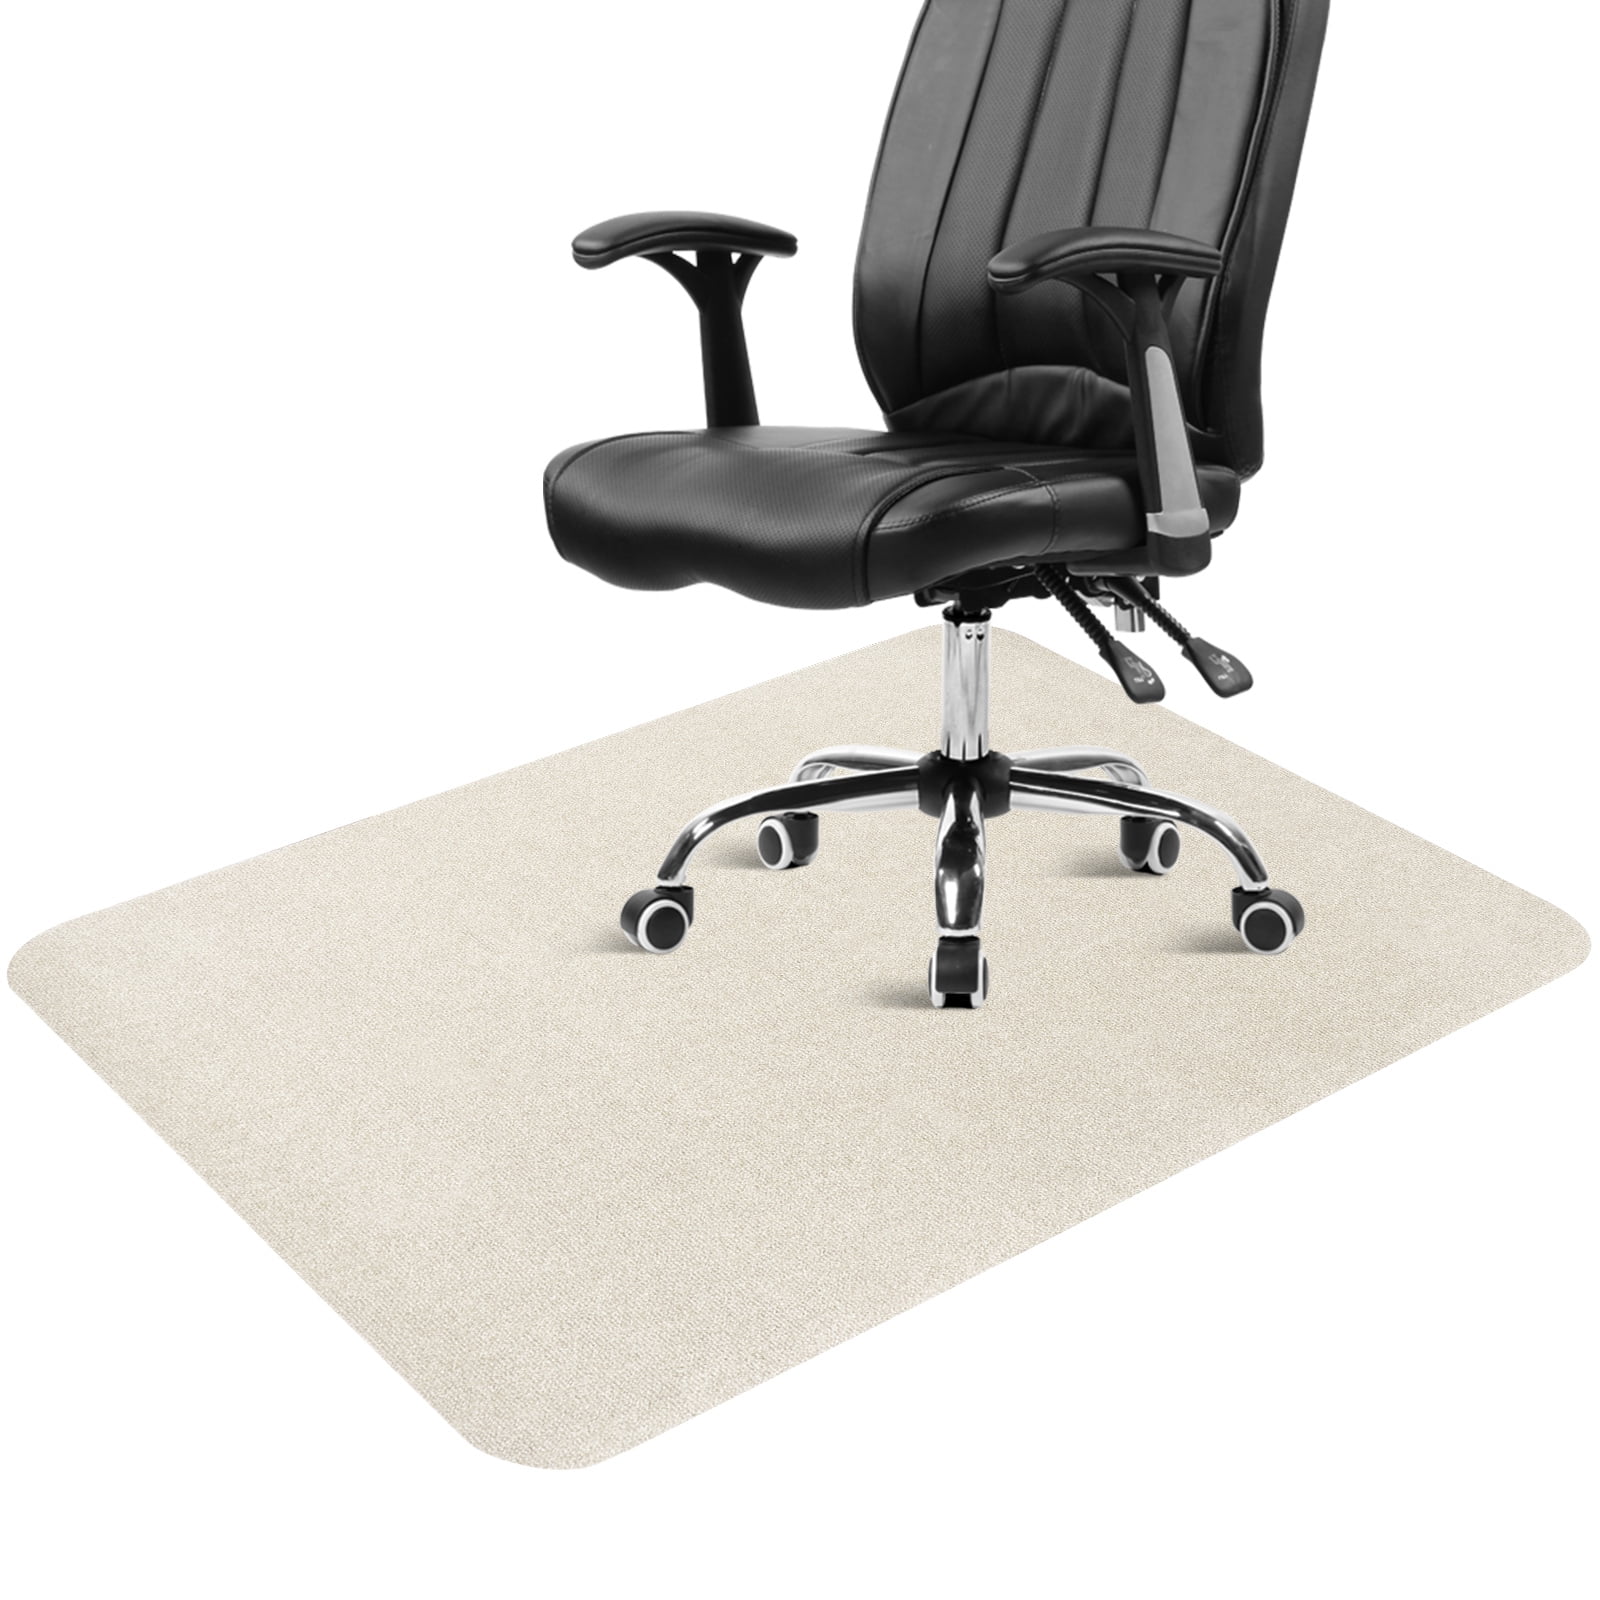 ECOSO Office Chair Mat for Hardwood/Tile Floor, with Lip, 36x 48,0.16  Thick, Hard Floor Protector, Anti Slip, Self Adhesive and ECO Friendly,  Floor